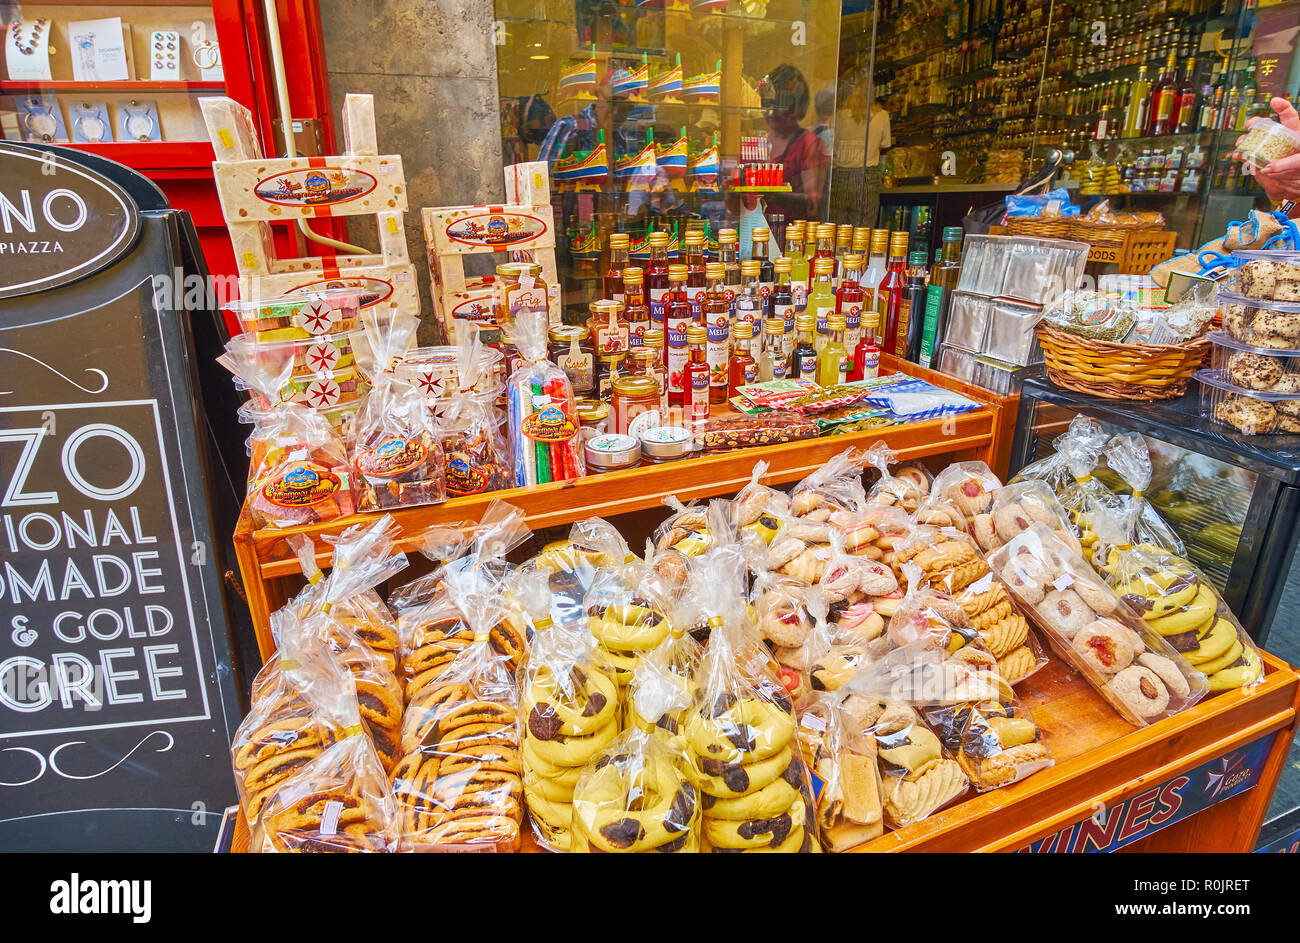 VICTORIA, MALTA - JUNE 15, 2018: The wide range of tasty souvenirs from Gozo Island - cookies, jam, local gbejna cheese, liquors and sweets on the tab Stock Photo